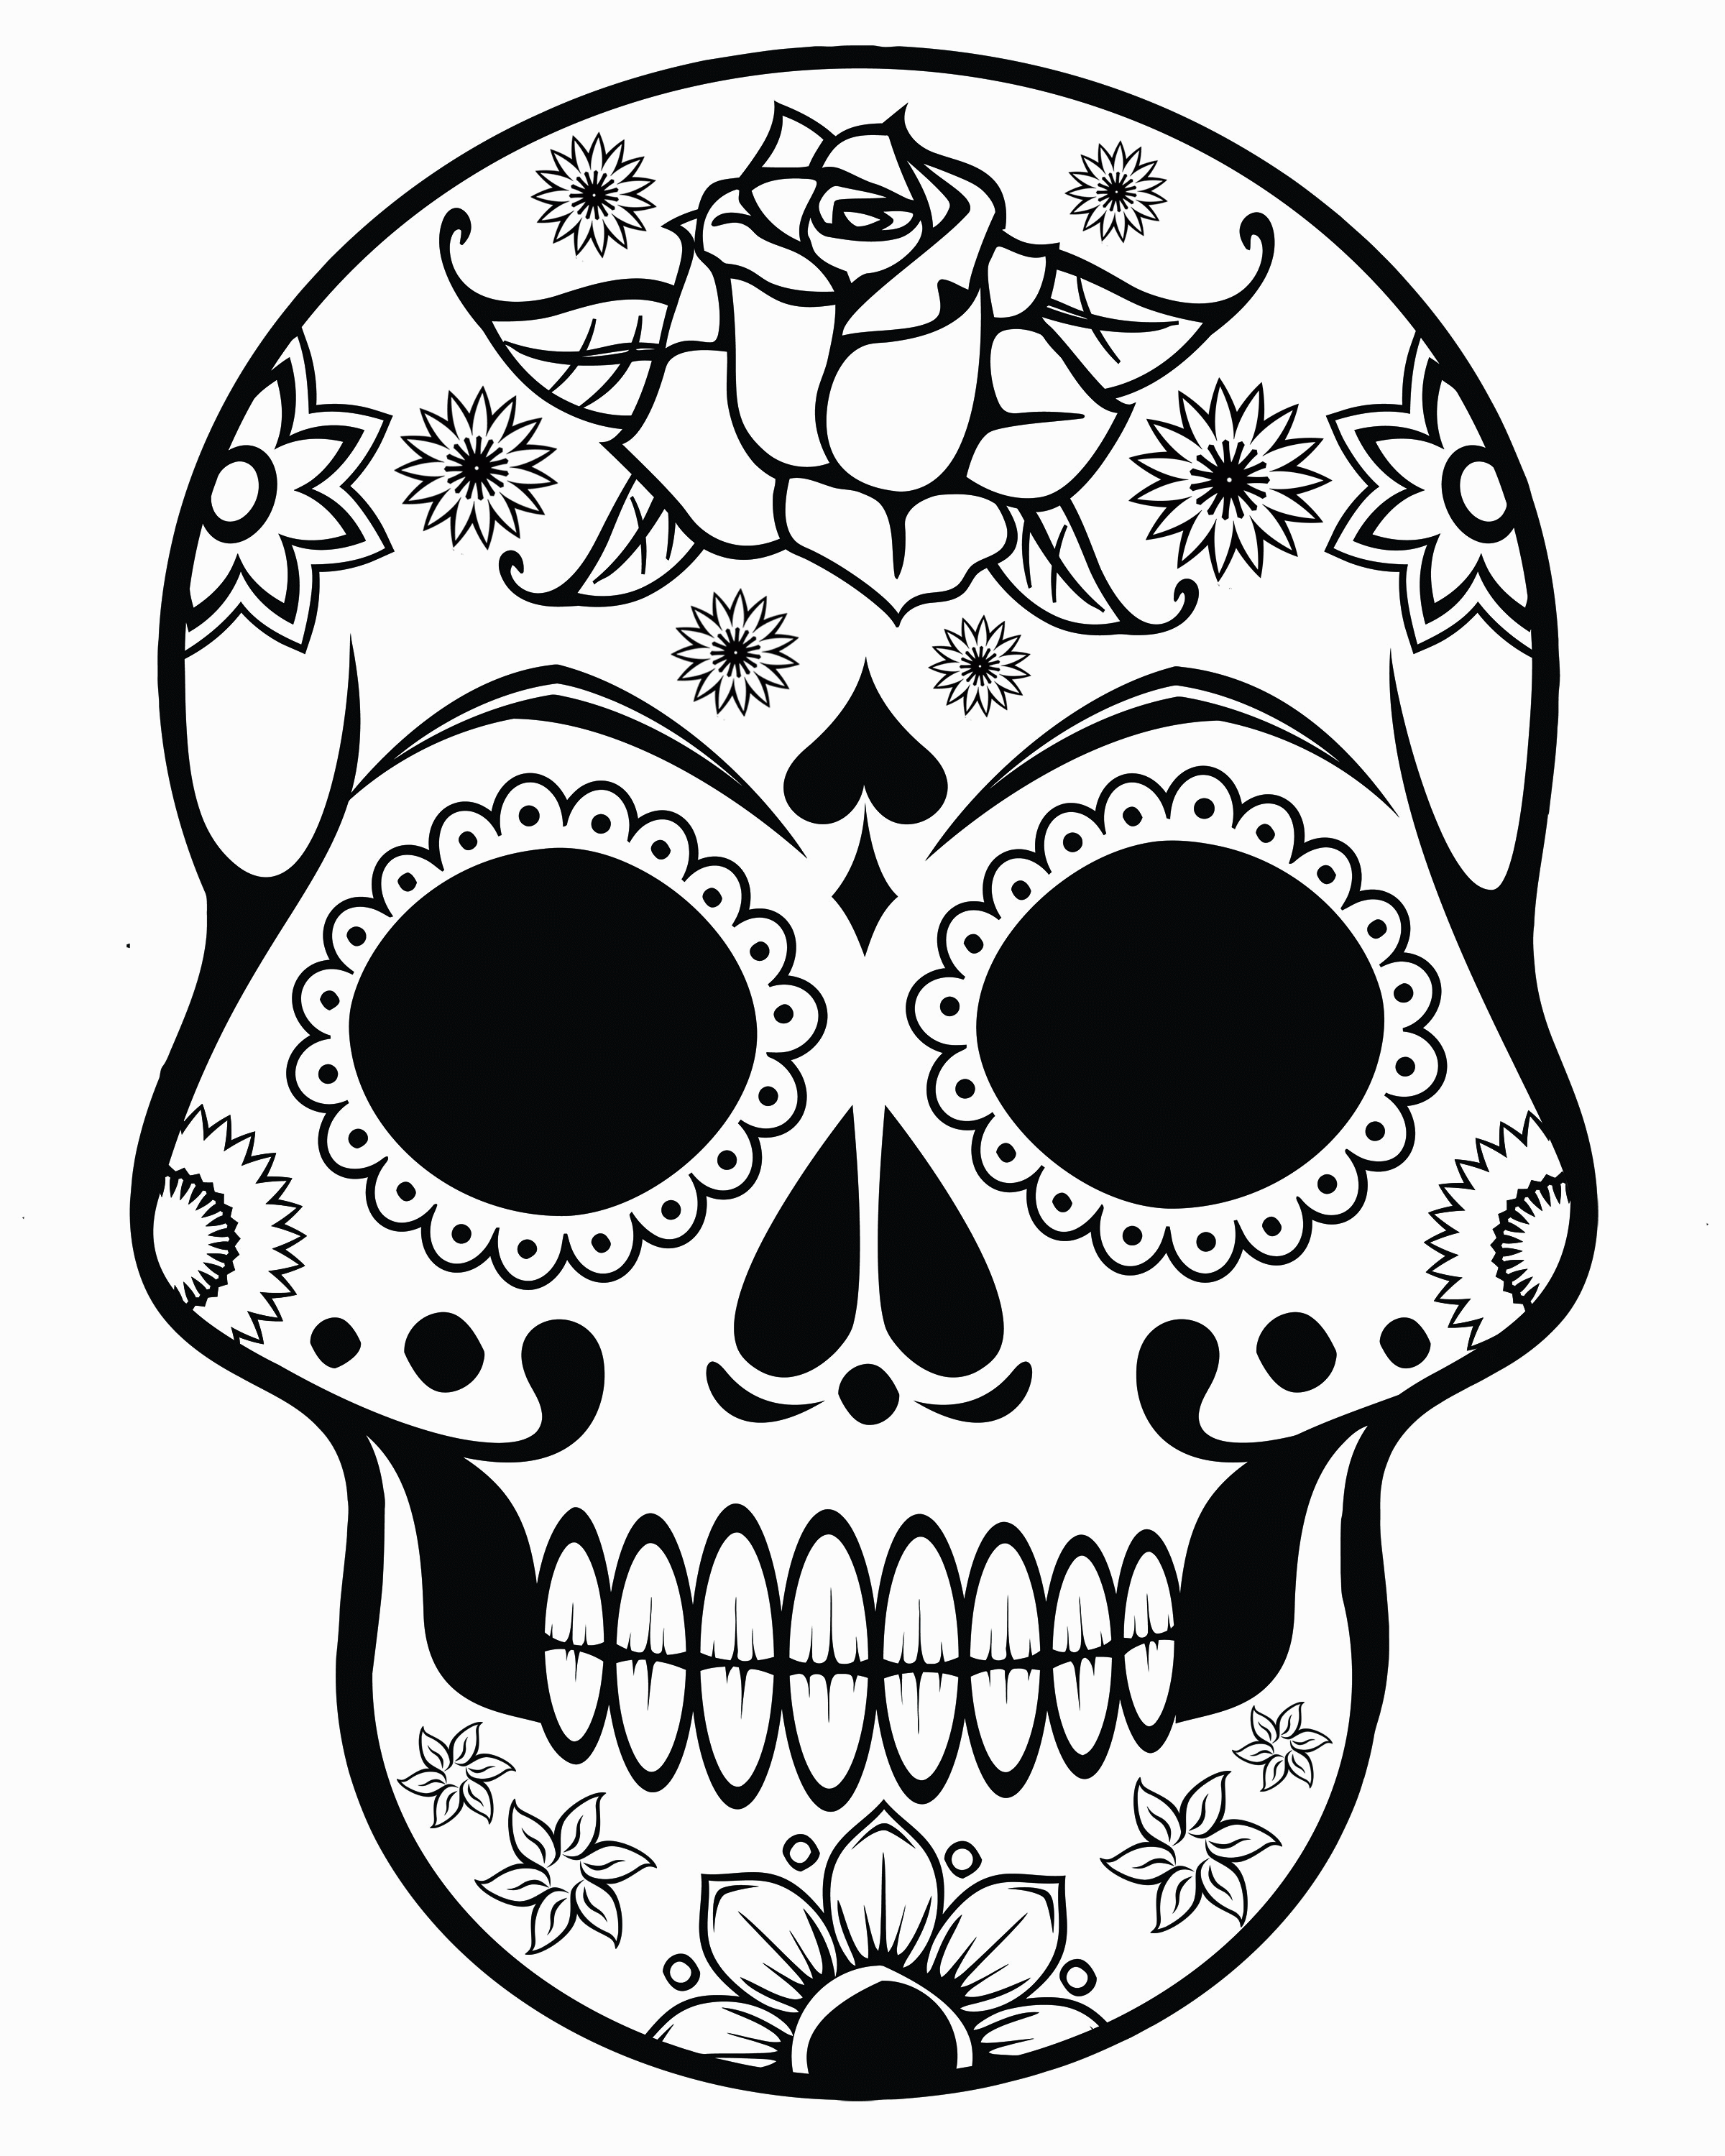 Sugar Skull Printables - Coloring Pages for Kids and for Adults